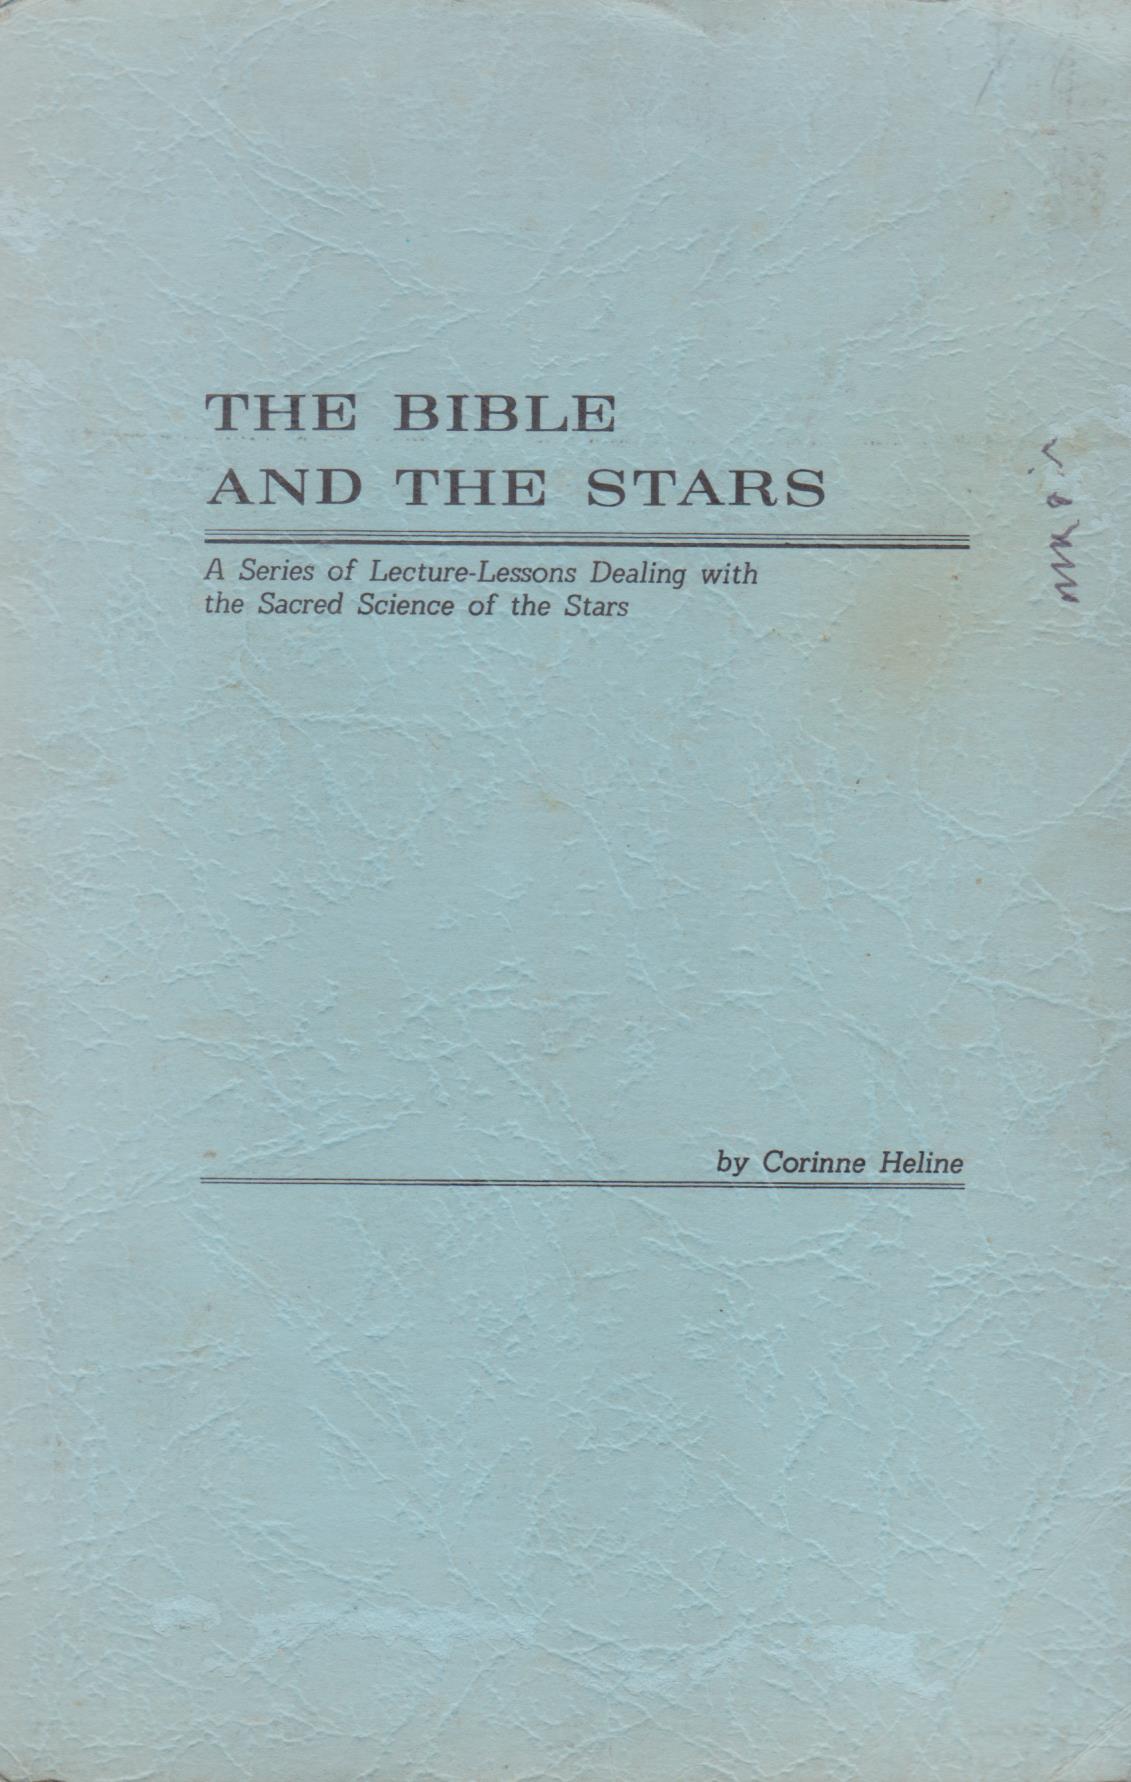 cover image of The Bible and the Stars a series of lecture-lessons